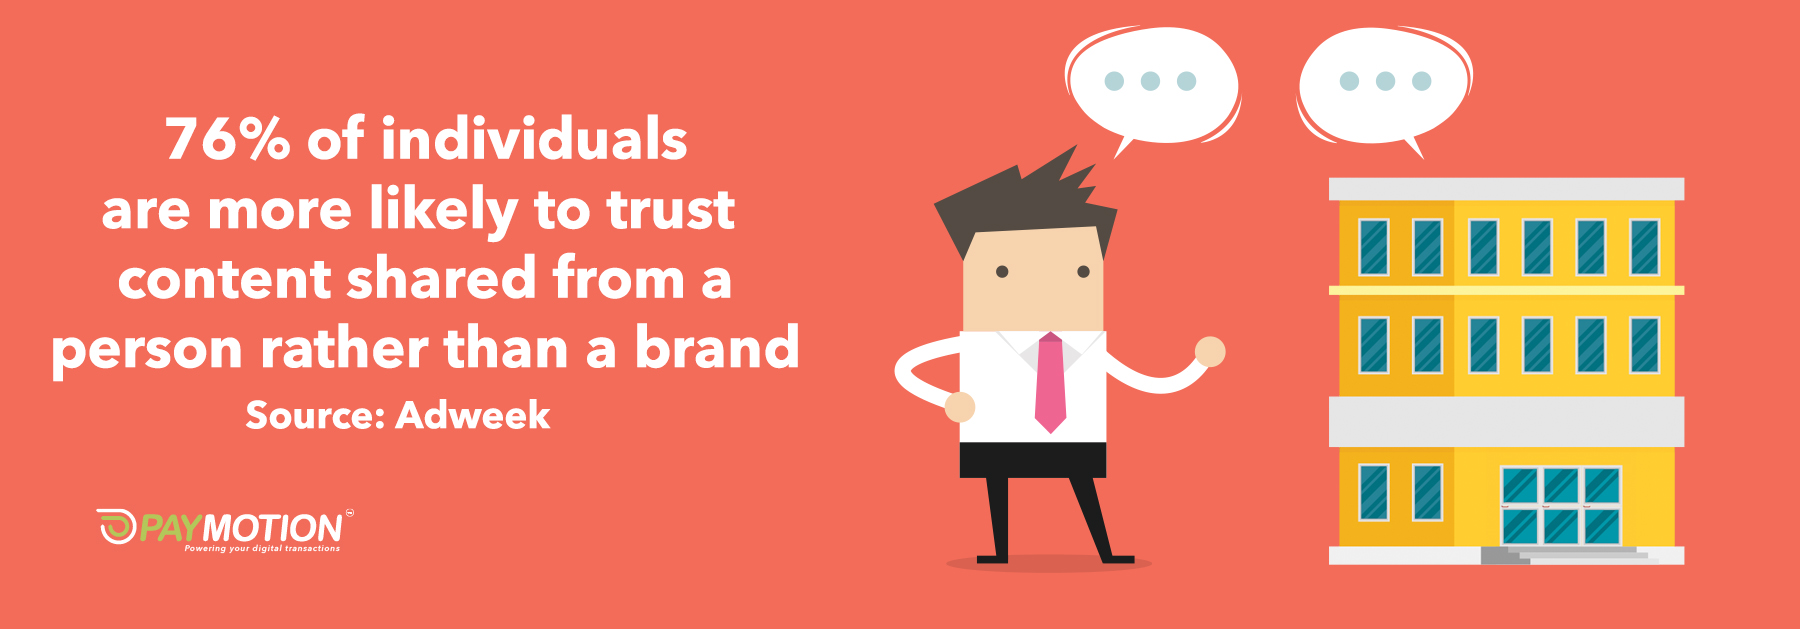 76% of individuals are more likely to trust content shared from a person rather than a brand